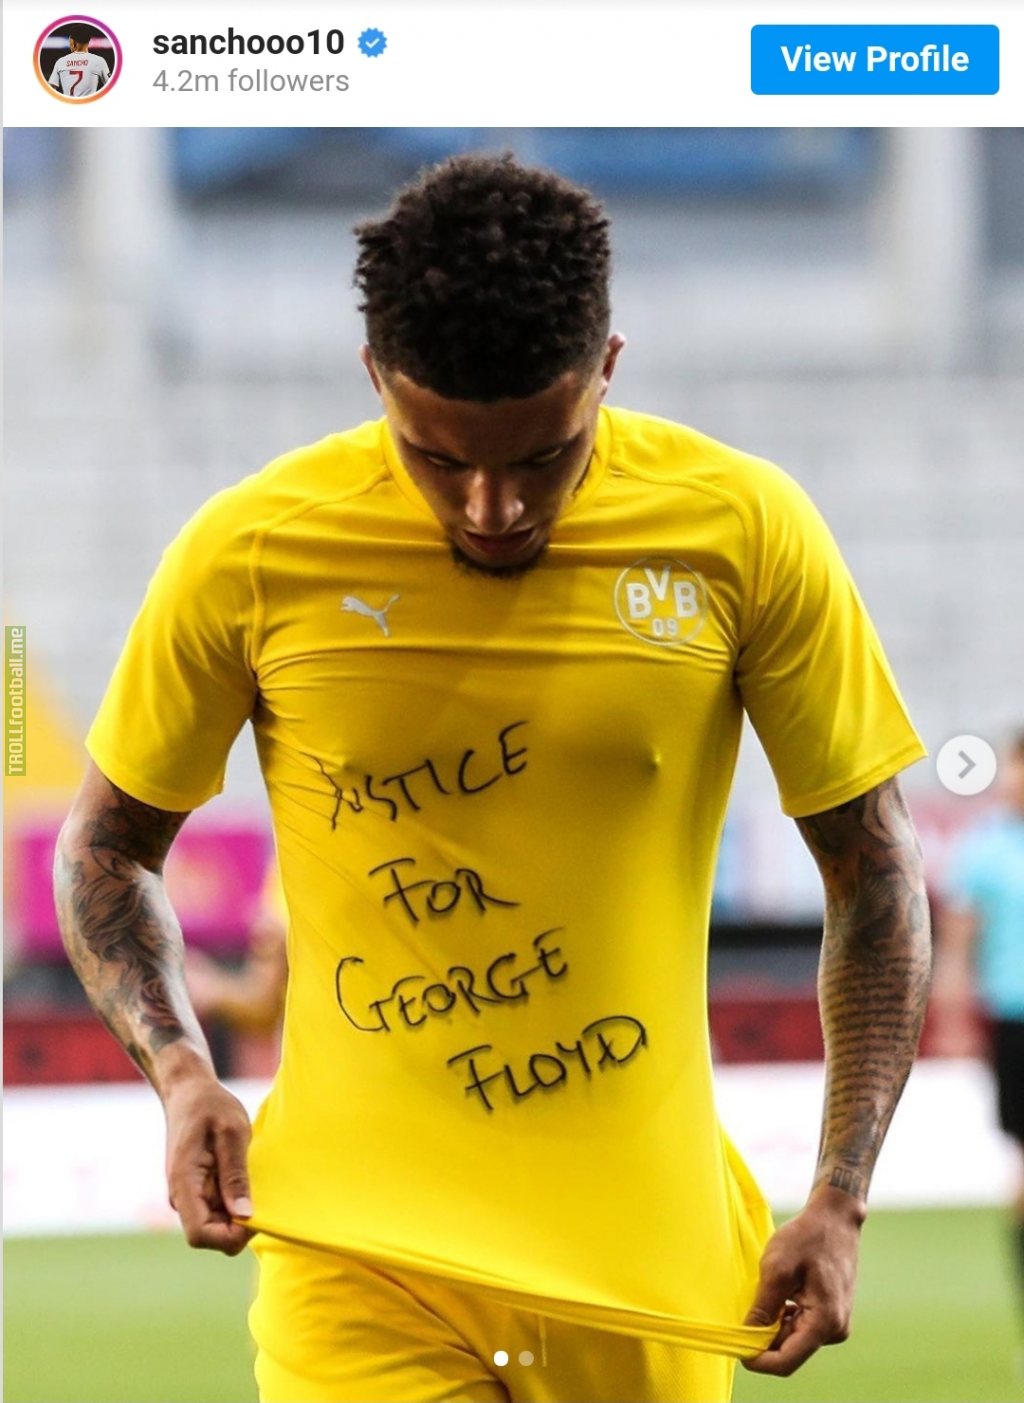 Jadon Sancho leads football's calls for 'Justice for George Floyd' Jadon Sancho broke an English and a Bundesliga record on Sunday, as the Borussia Dortmund winger scored a hat-trick in a 6-1 rout of Paderborn. But his celebration made as many headlines. By OmniSport 1st Jun 2020